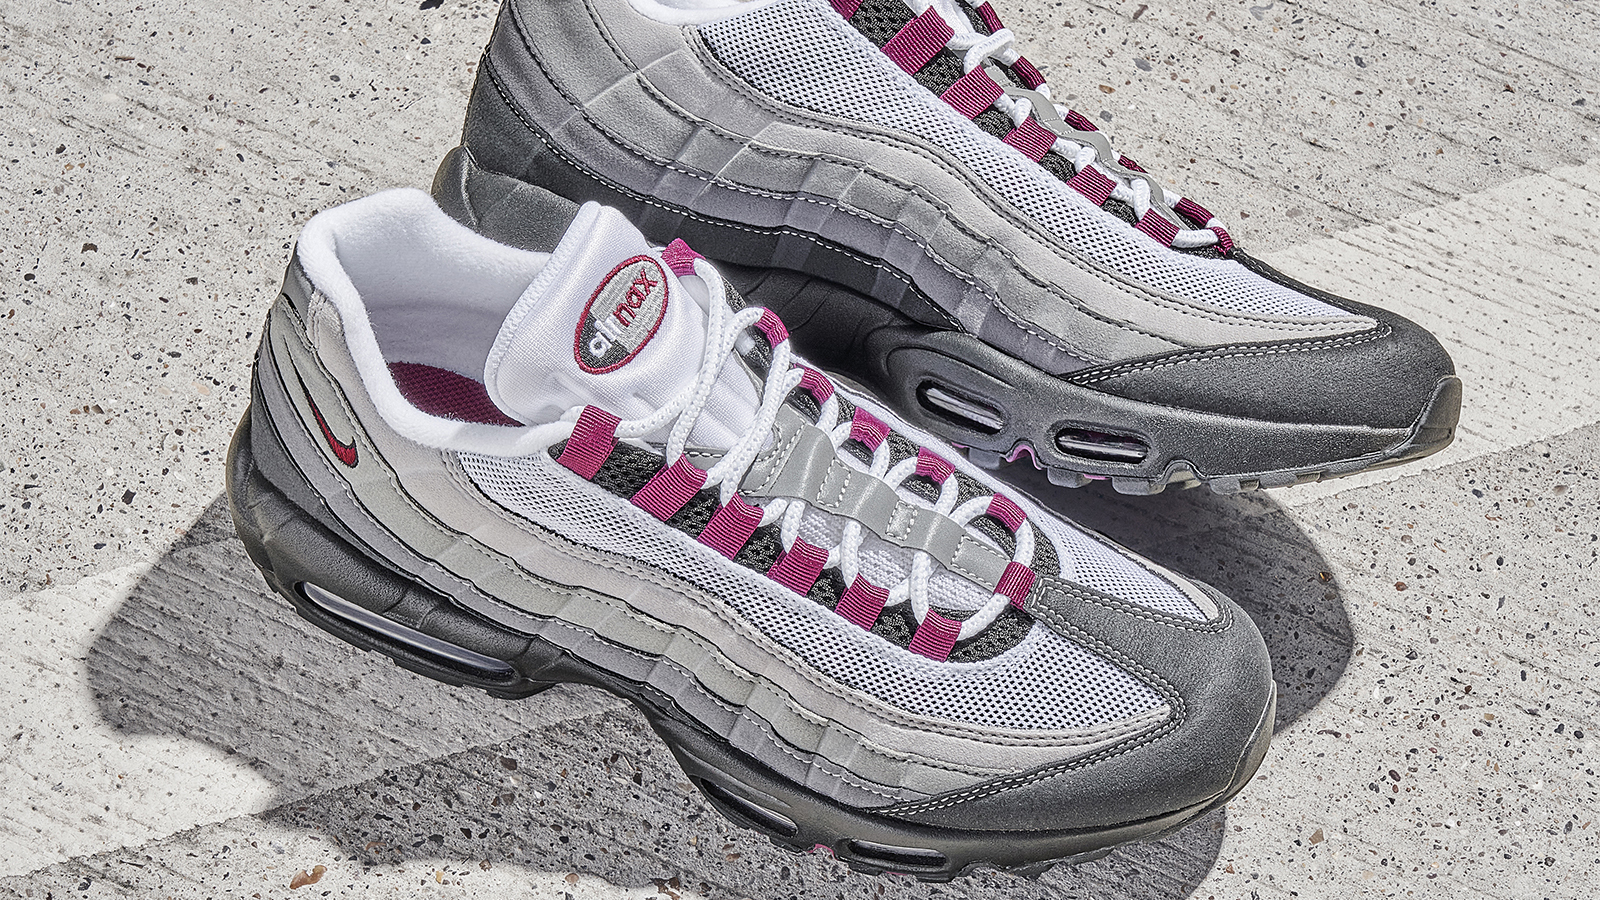 Scouse or South: How The Nike Air Max 95 Became a Cultural Icon 